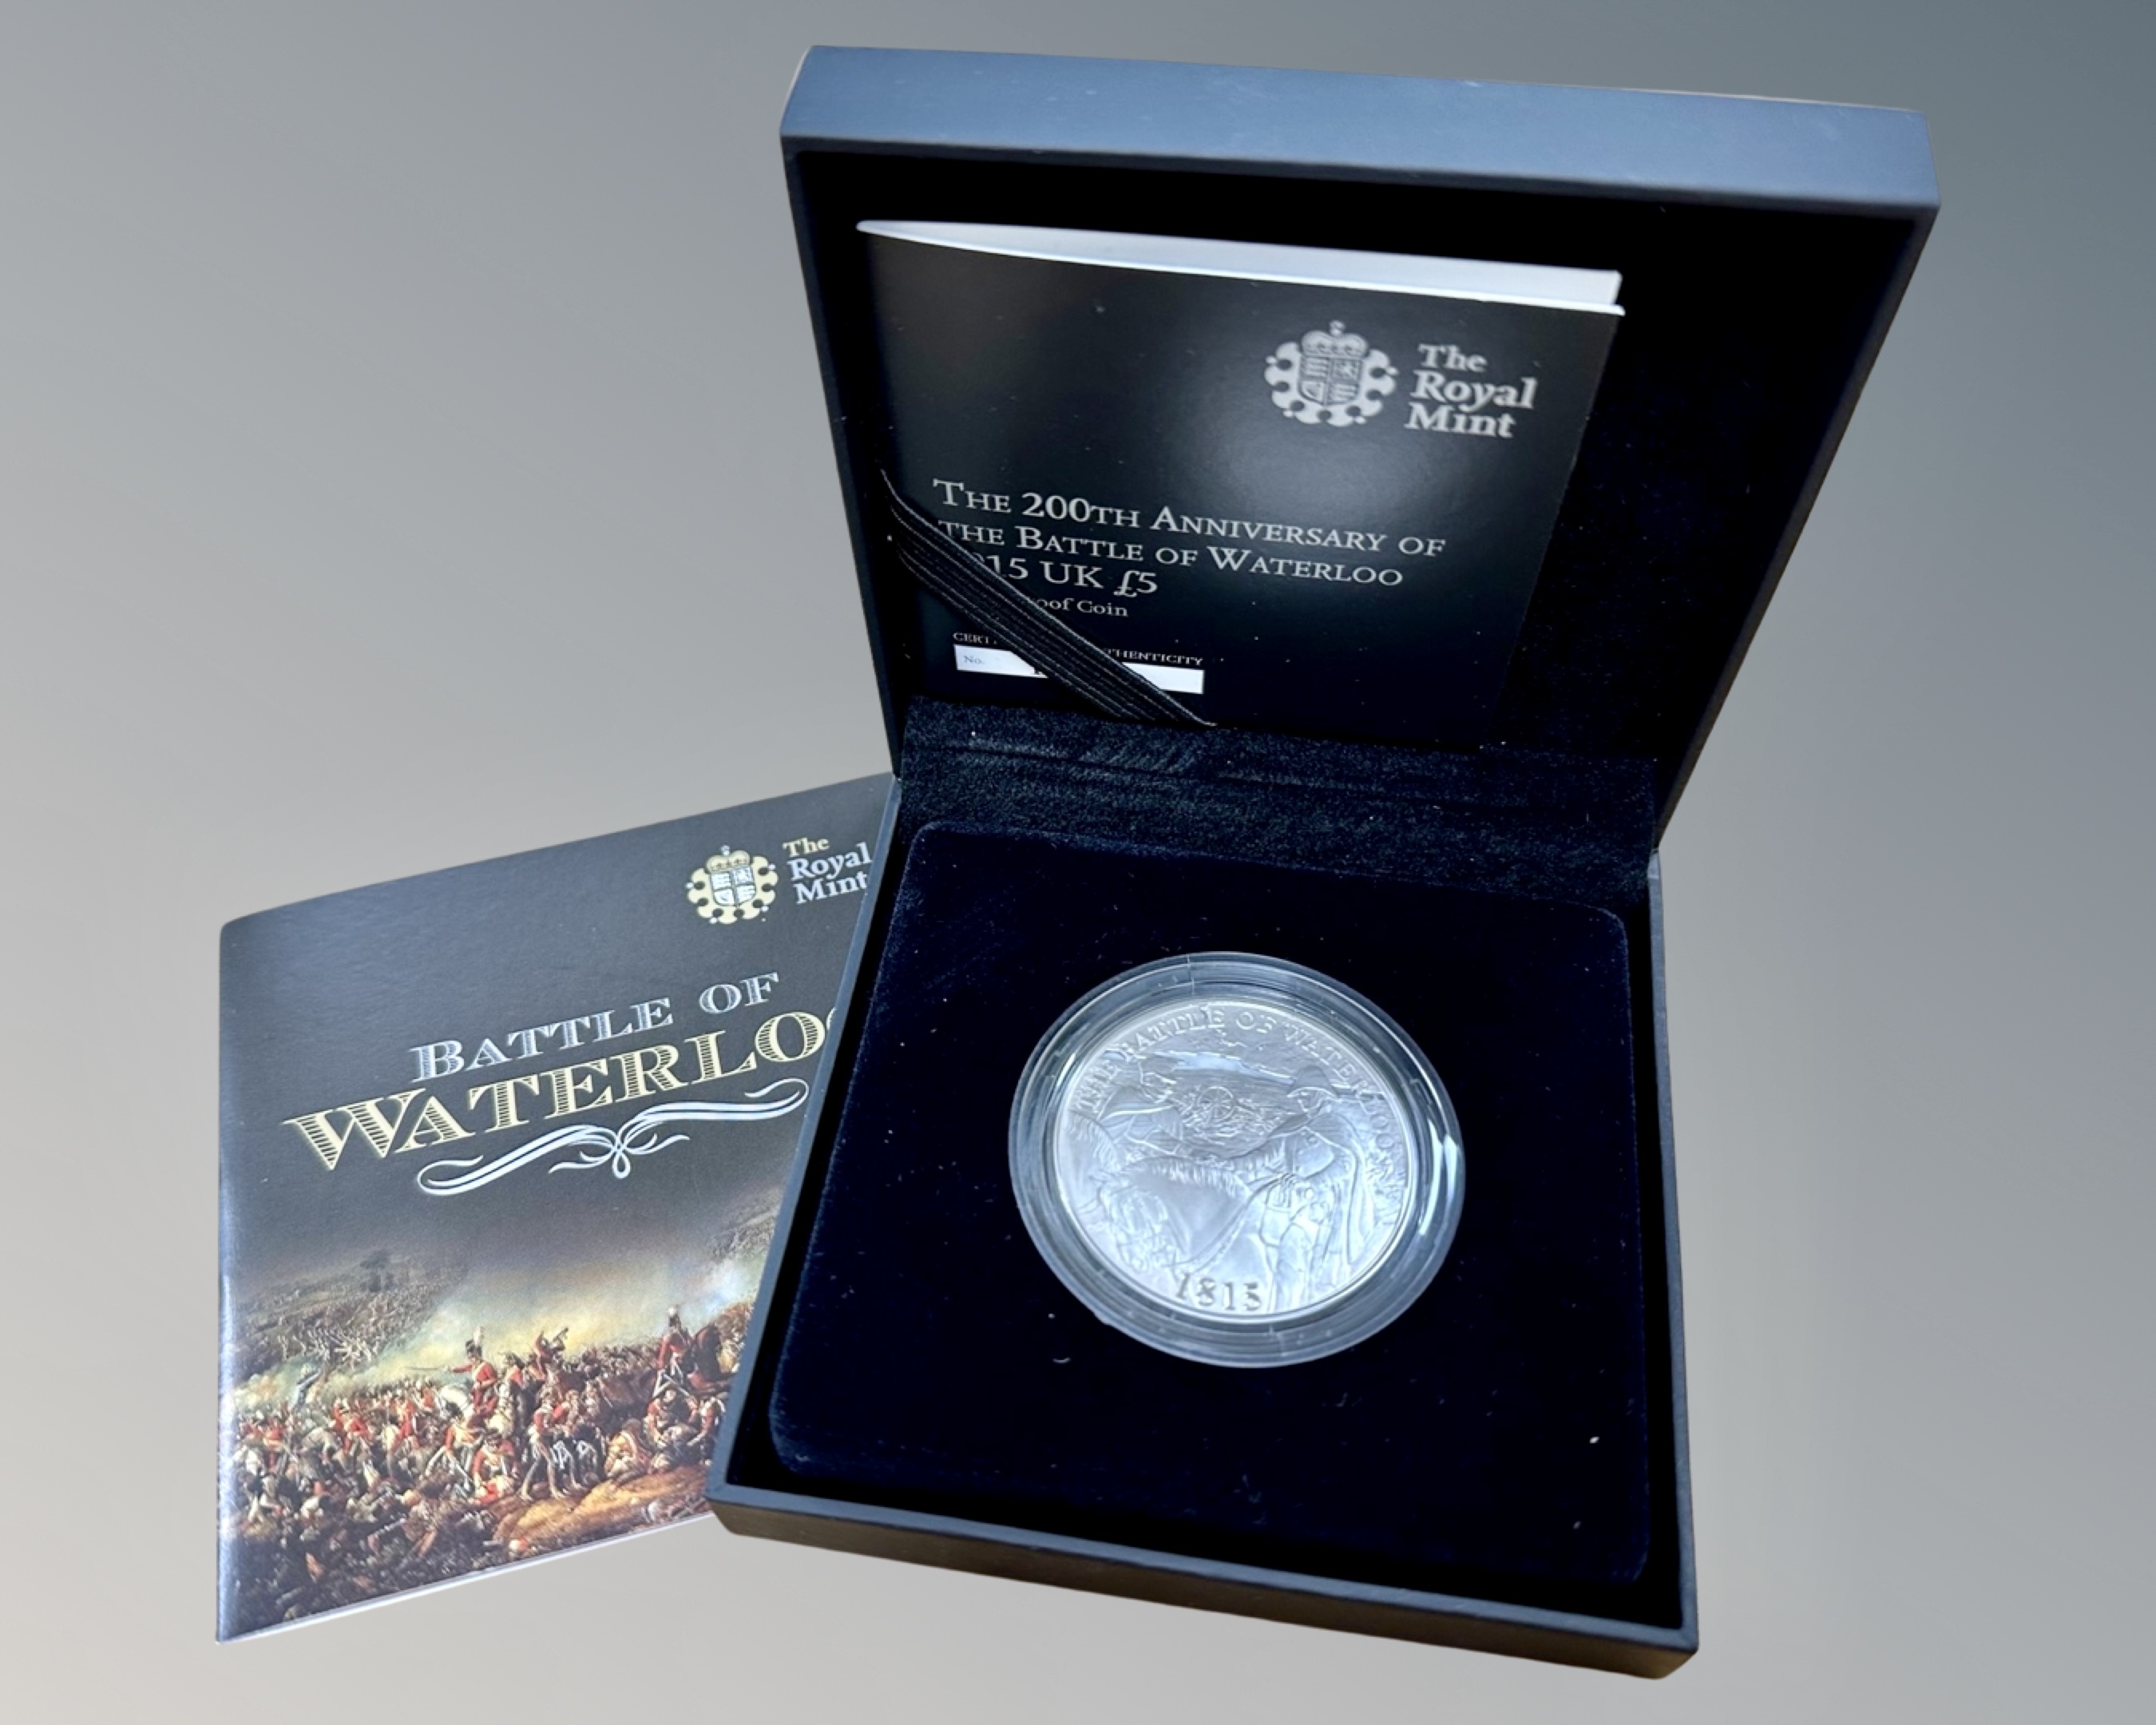 The Royal Mint : The 200th Anniversary of The Battle of Waterloo 2015 Uk £5 silver proof coin, 28.